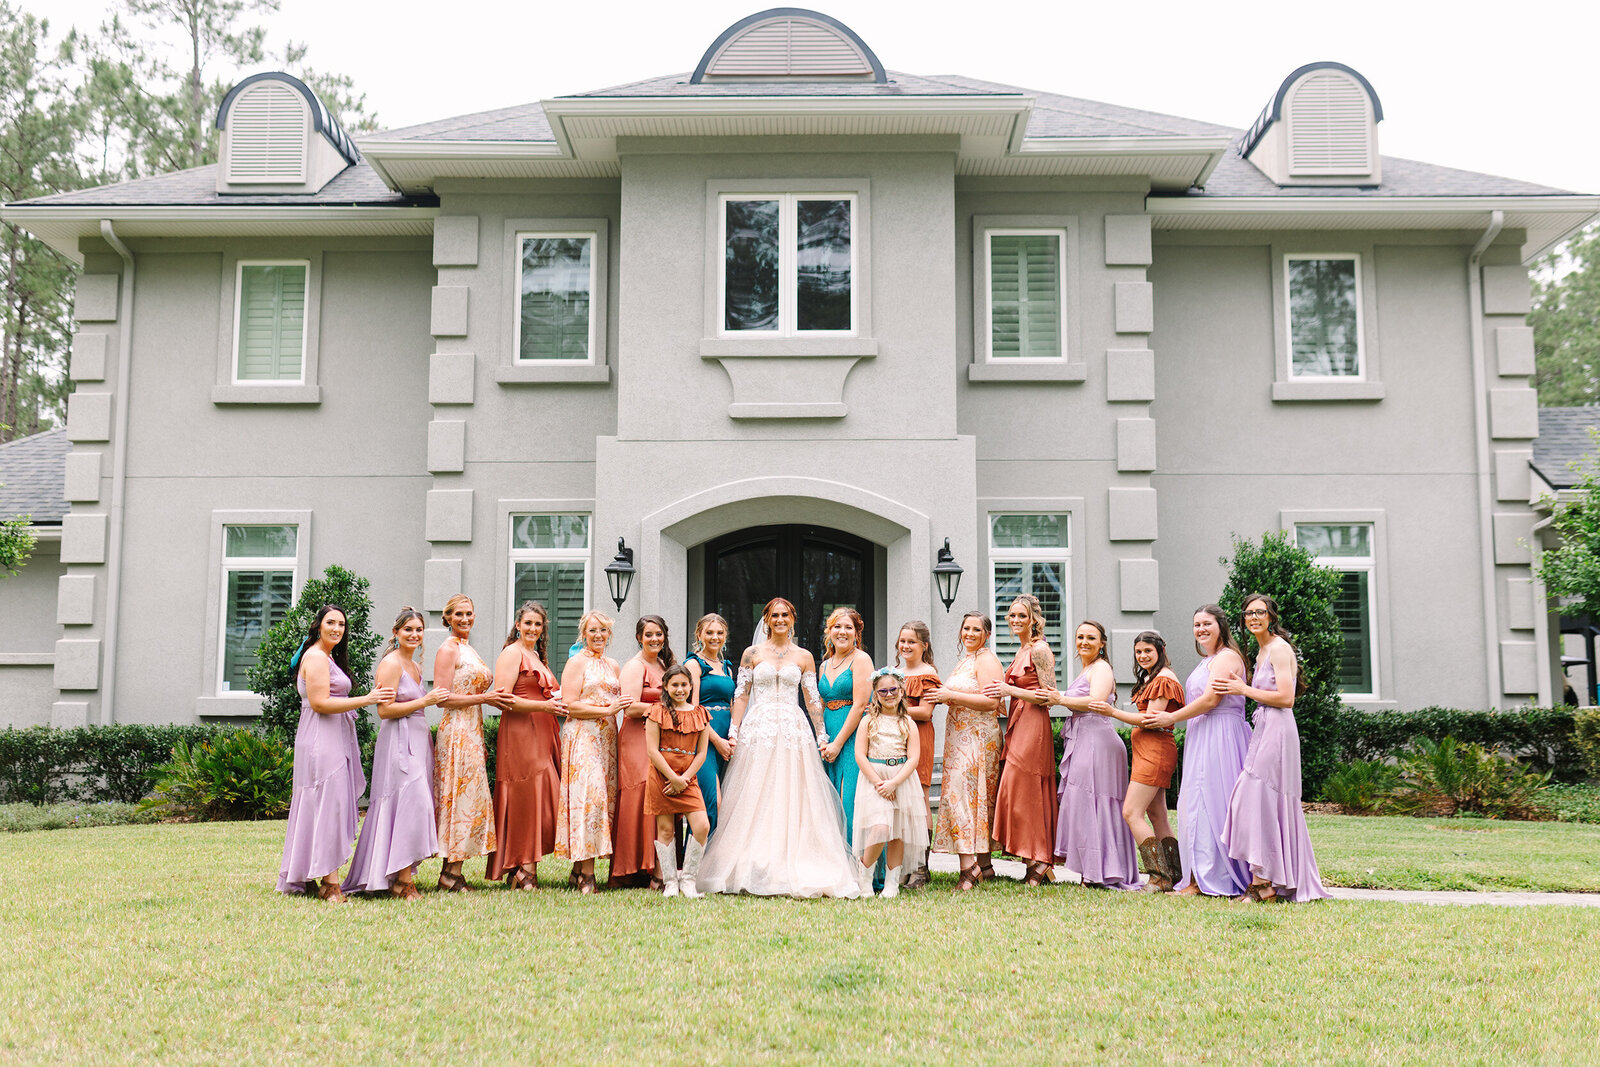 A 17 person bridal party just the brides side all wearing different colors some with beautiful floral patterns